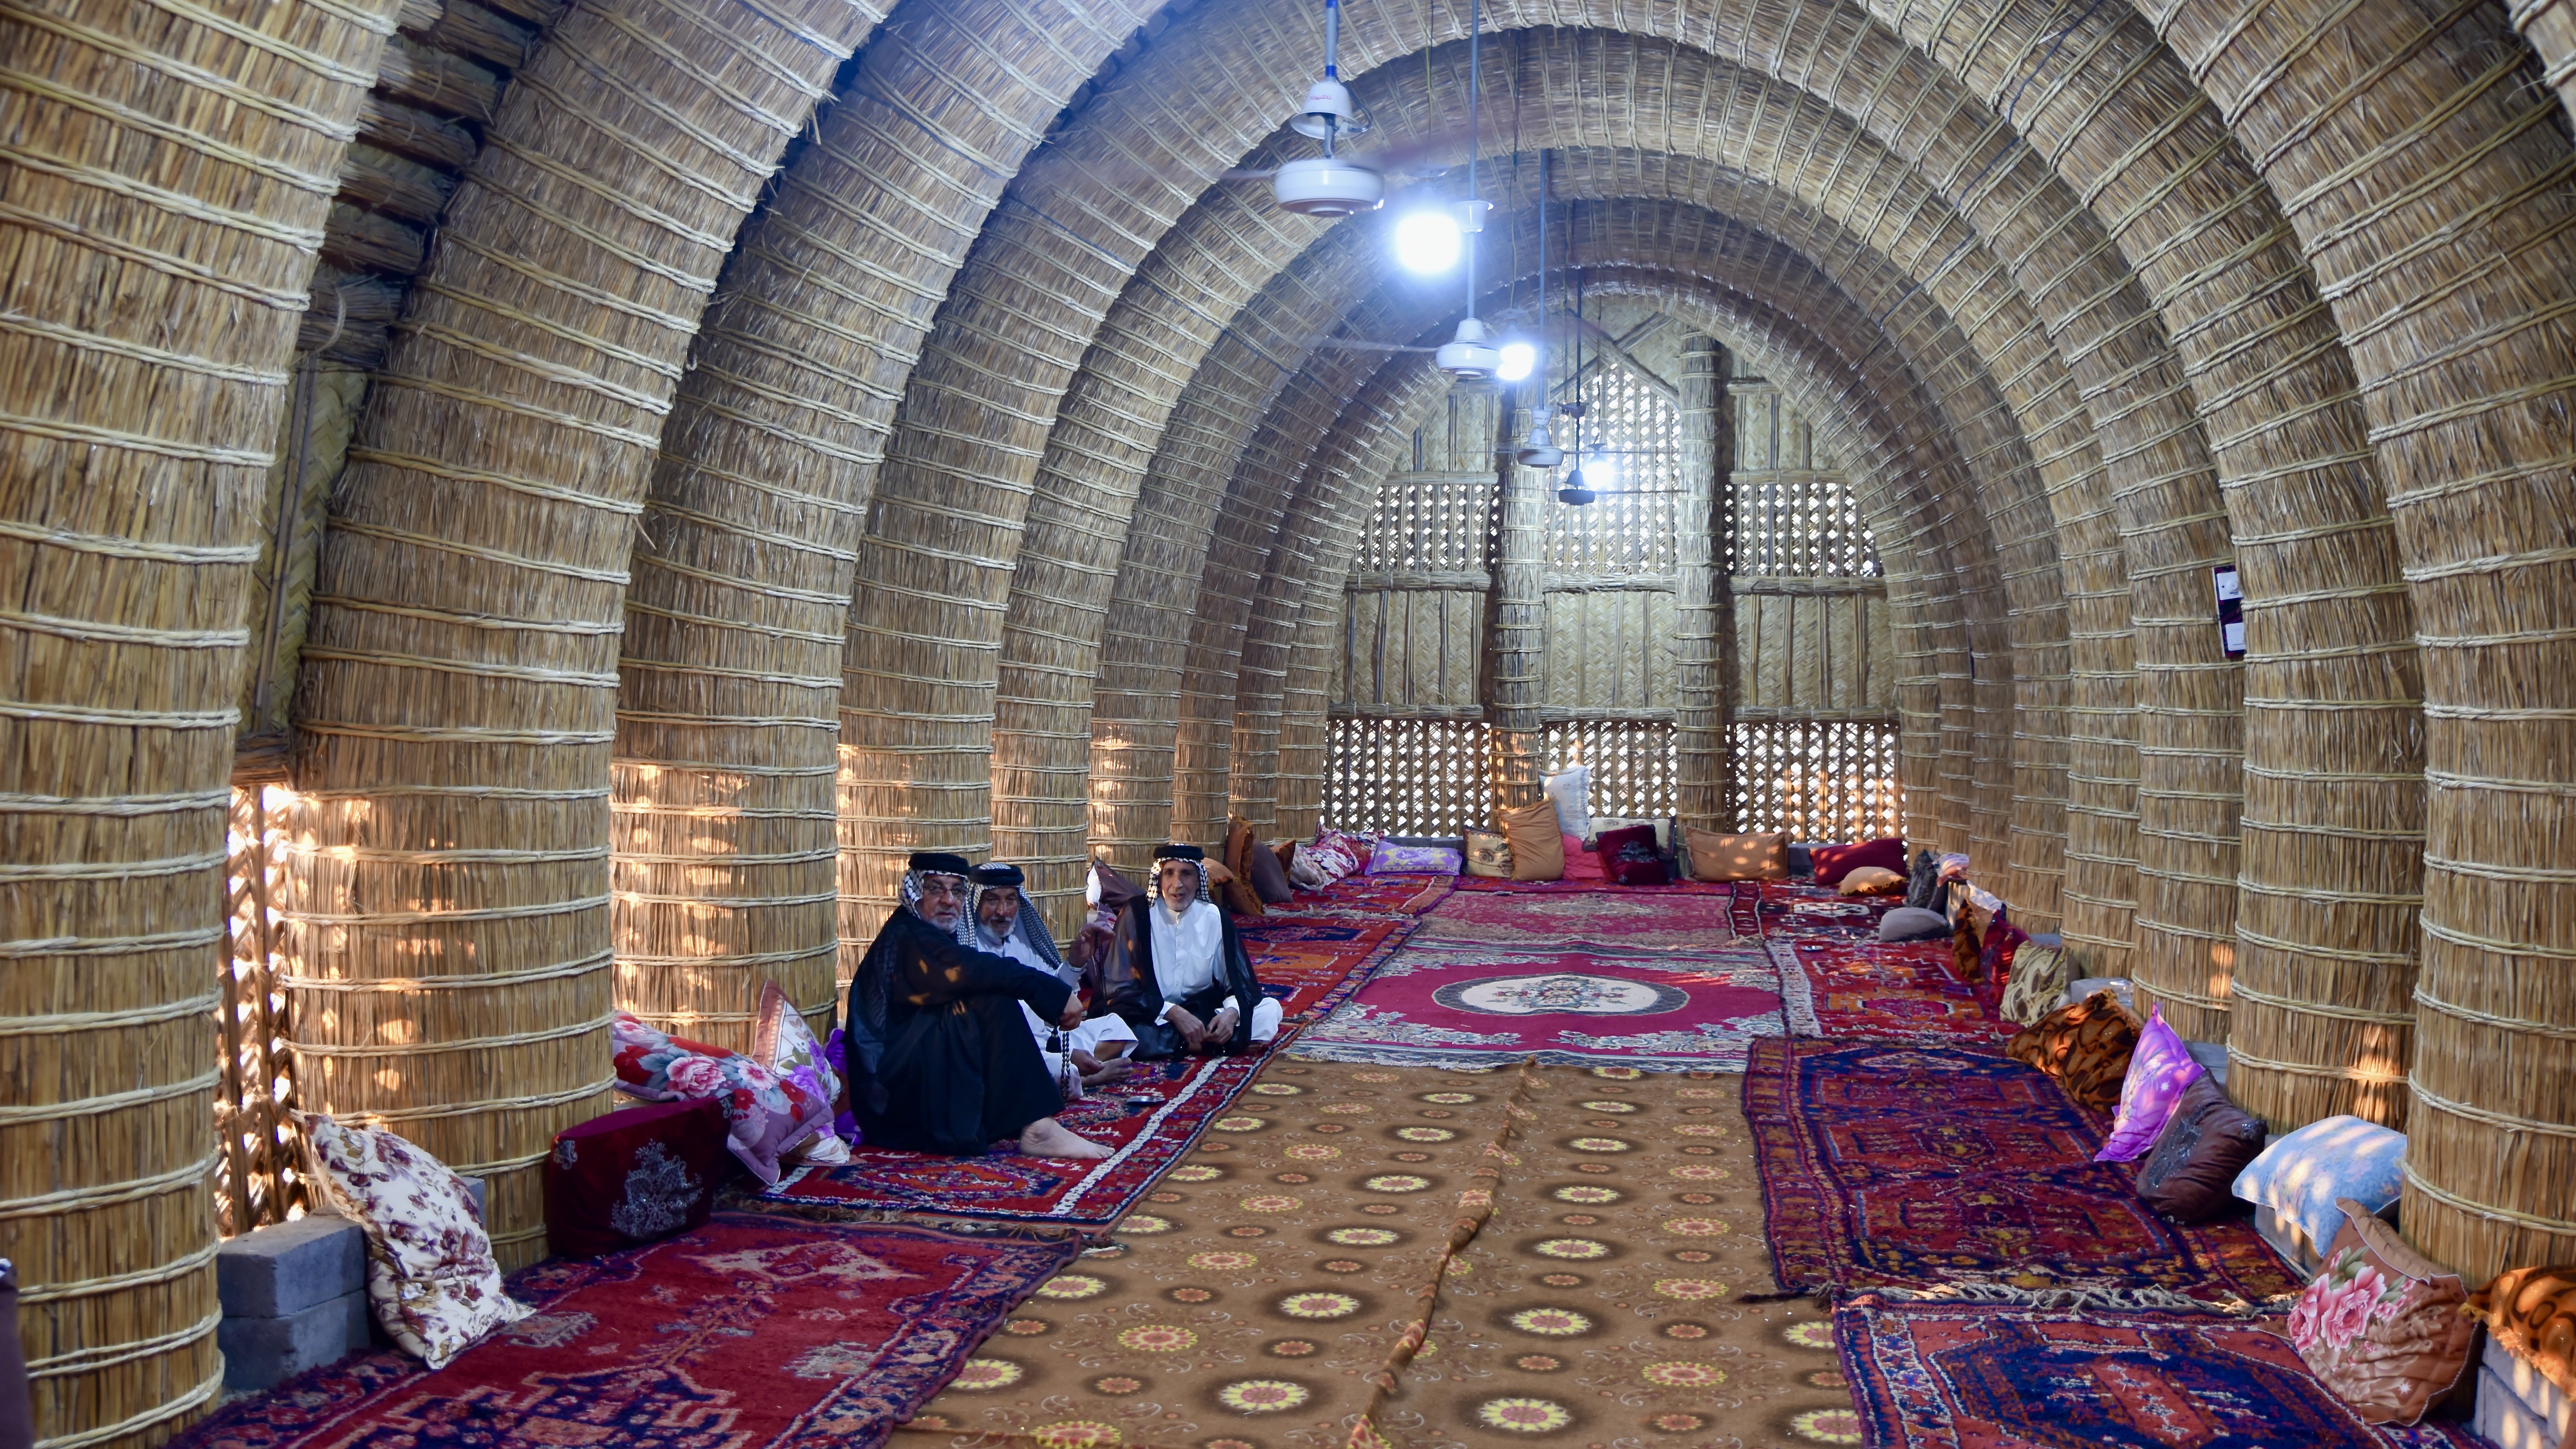 Interior of a traditional mudhif, constructed using reeds. Lined with carpets, the hall provides a meeting place for male members of the community